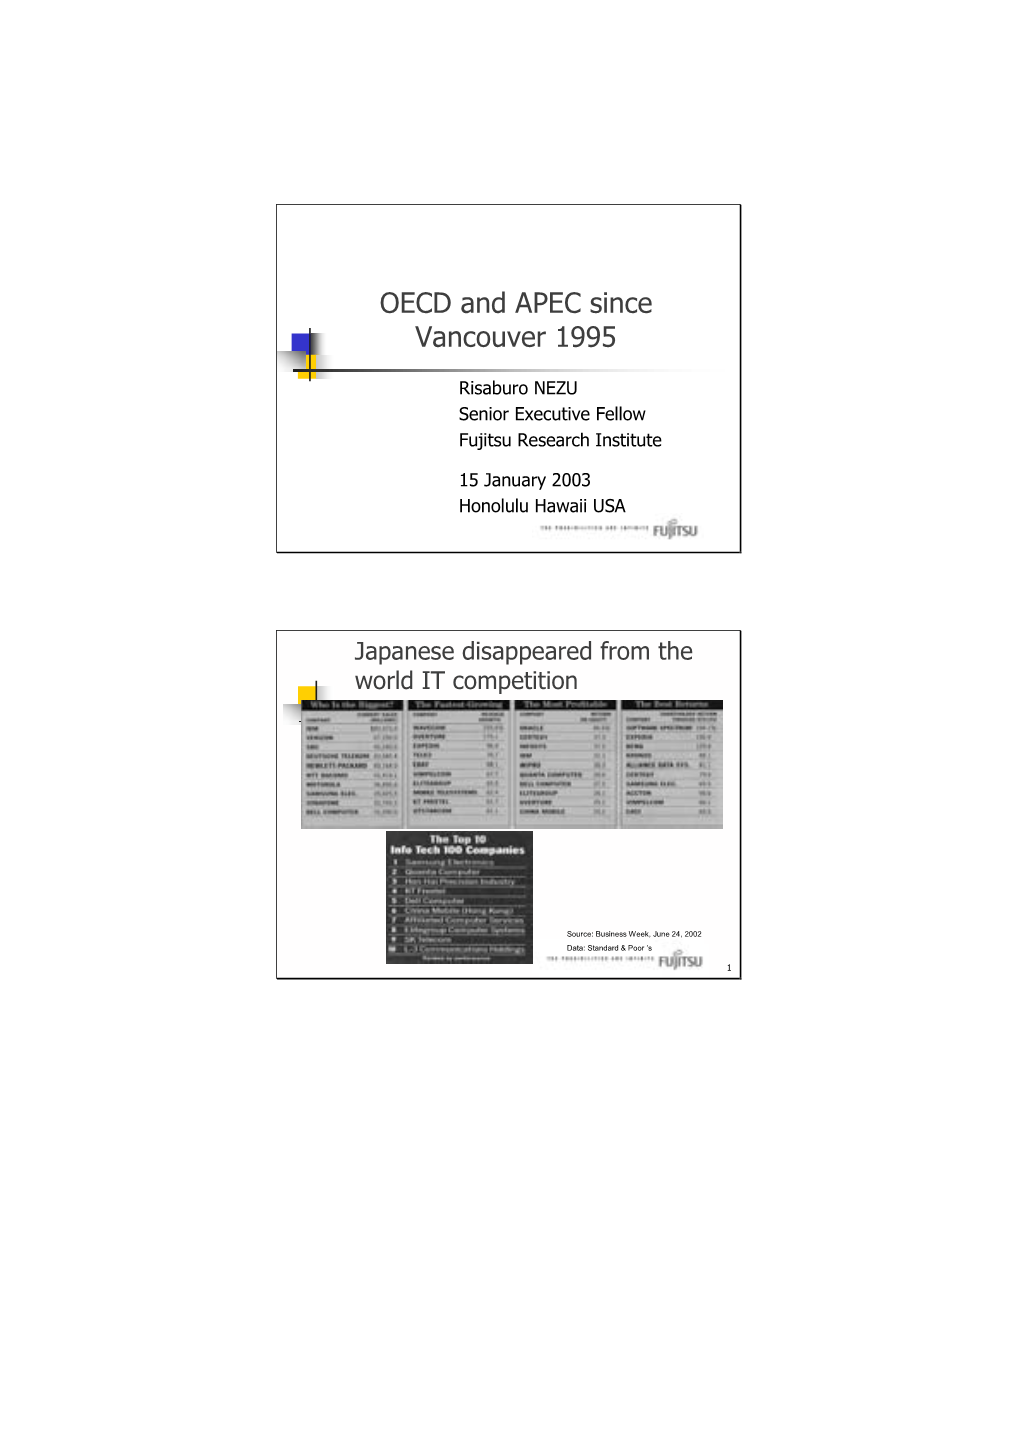 OECD and APEC Since Vancouver 1995